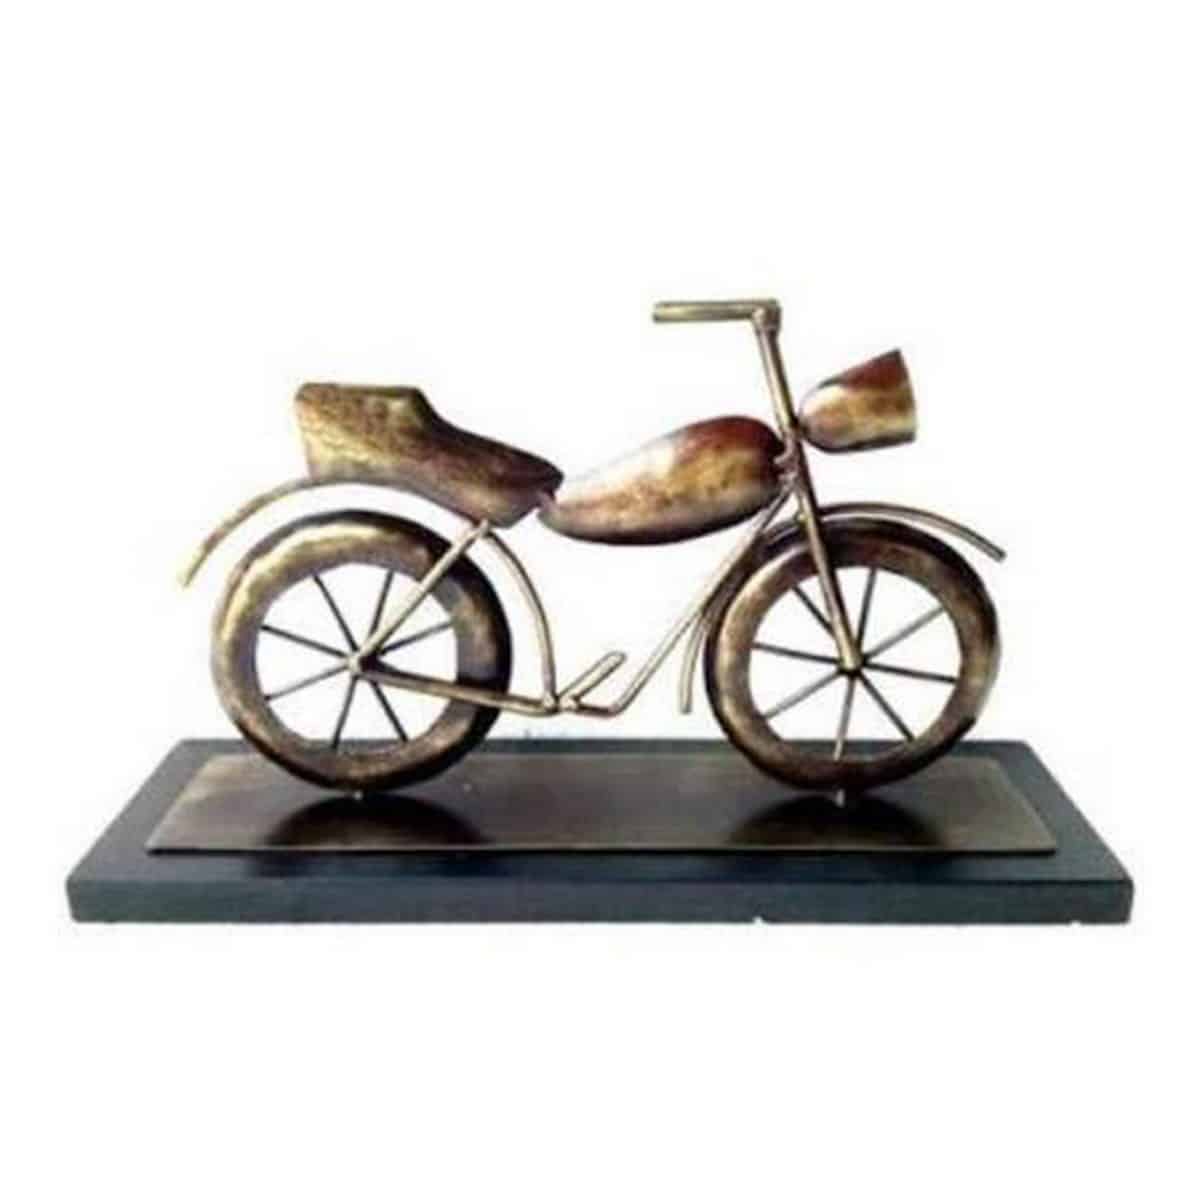 Table Top Decor Item of Small Vintage Bike  